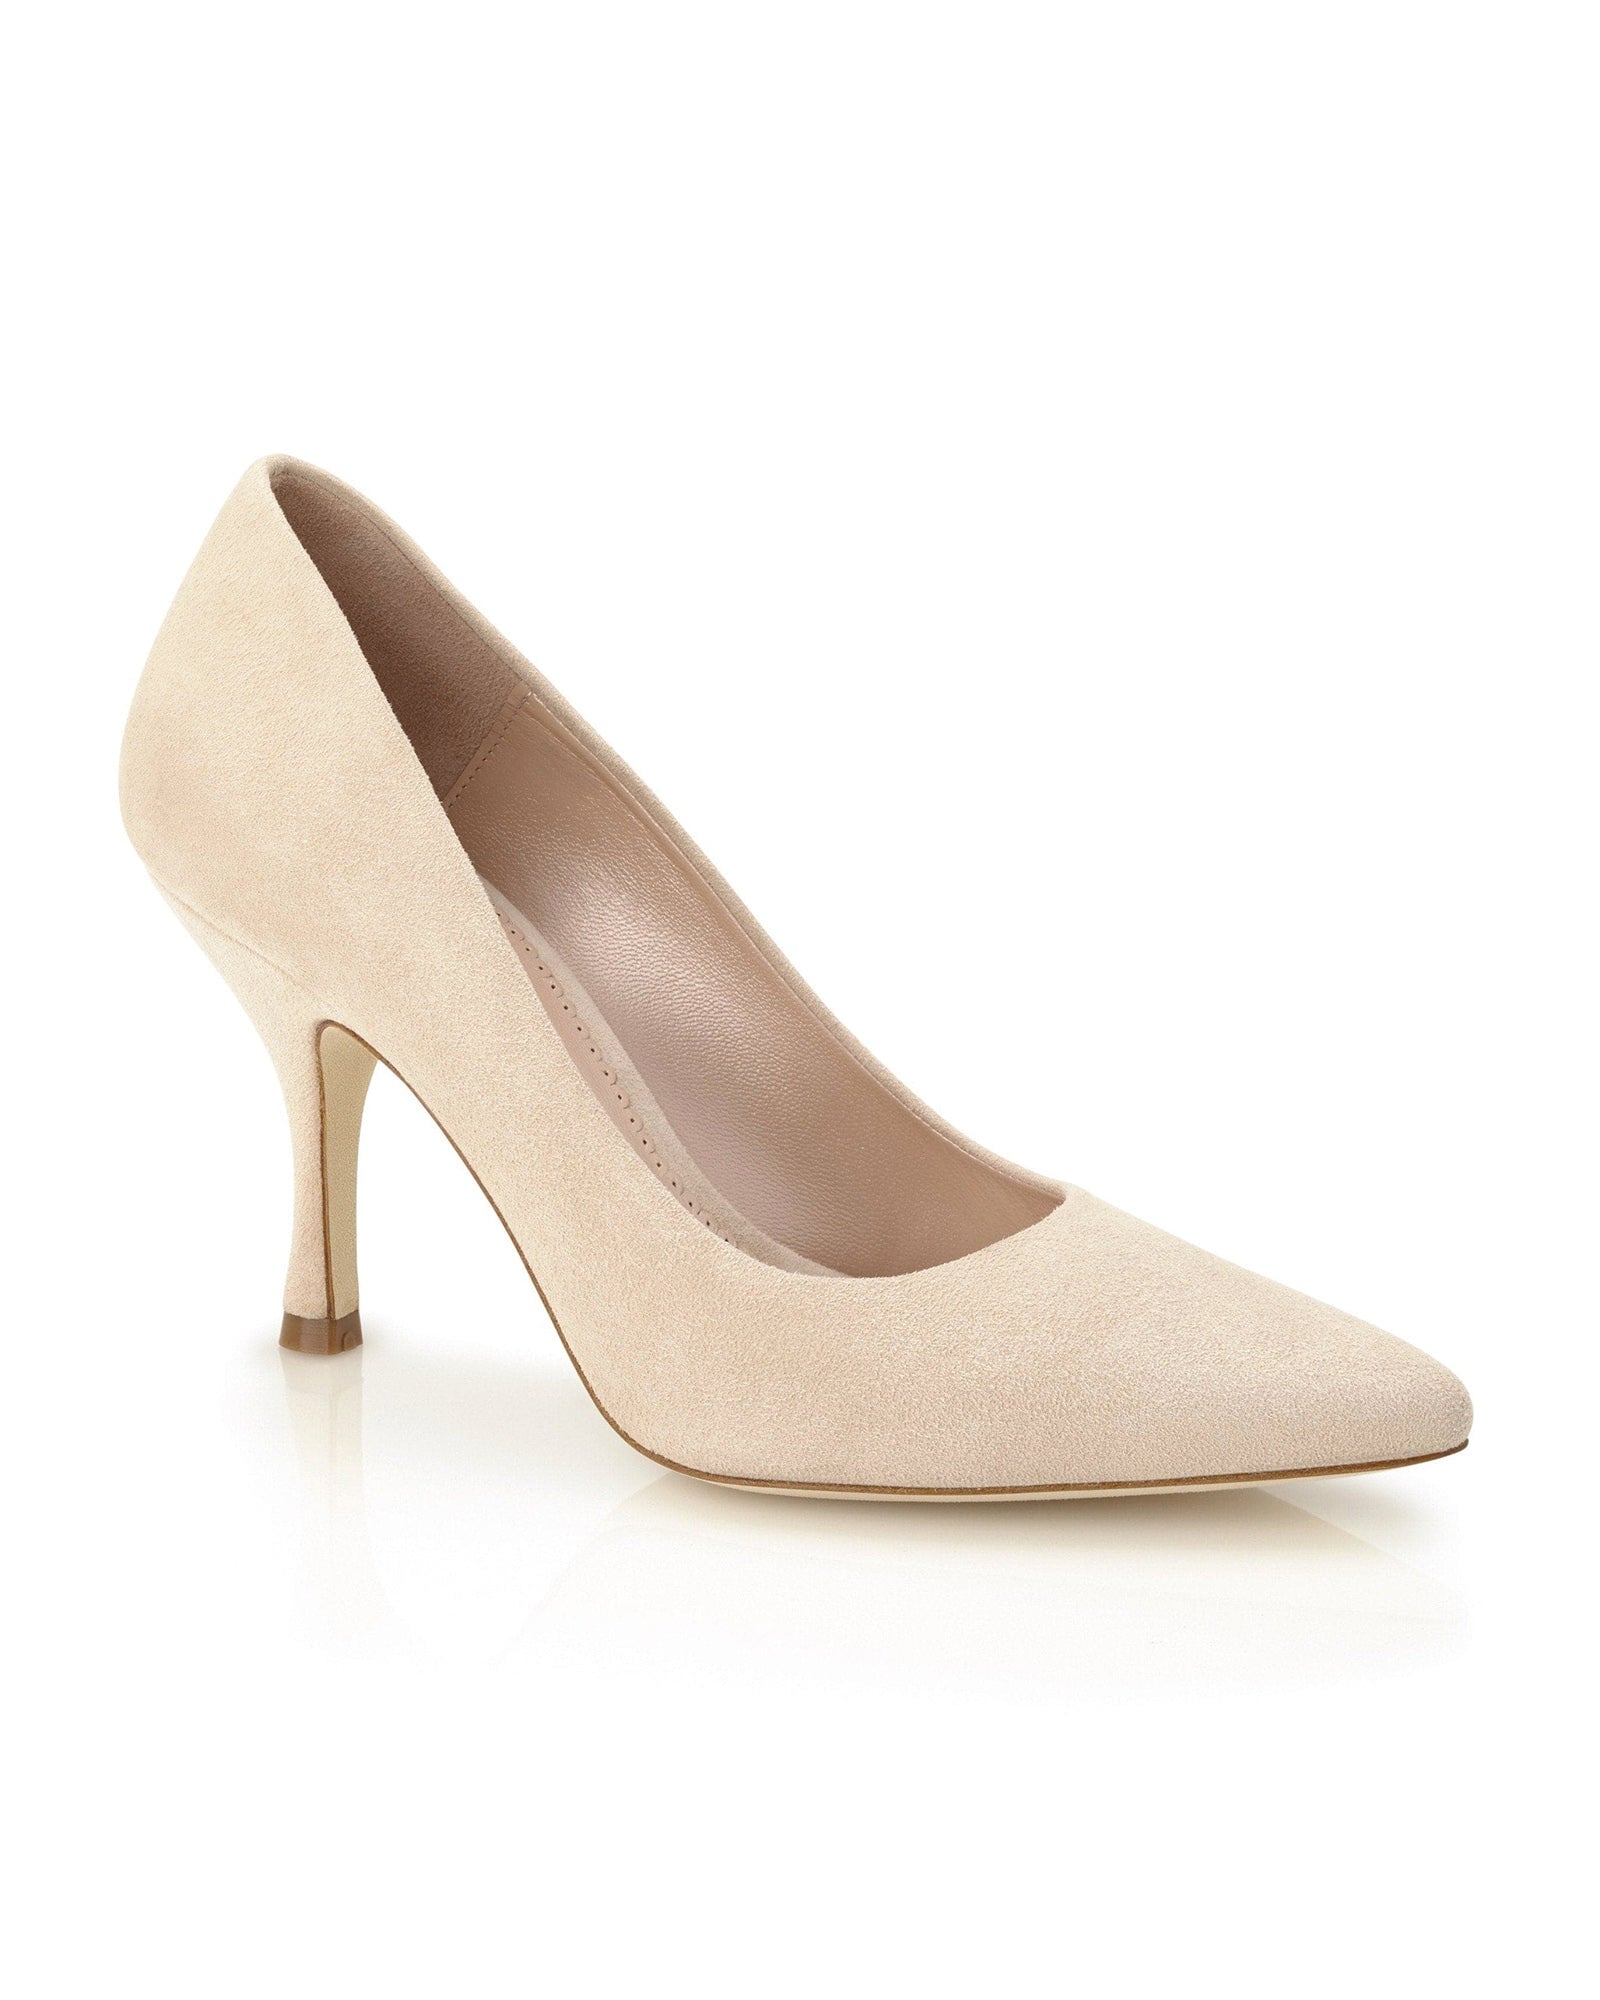 Olivia Blush Fashion Shoe Nude Pointed Suede Court Shoes  image